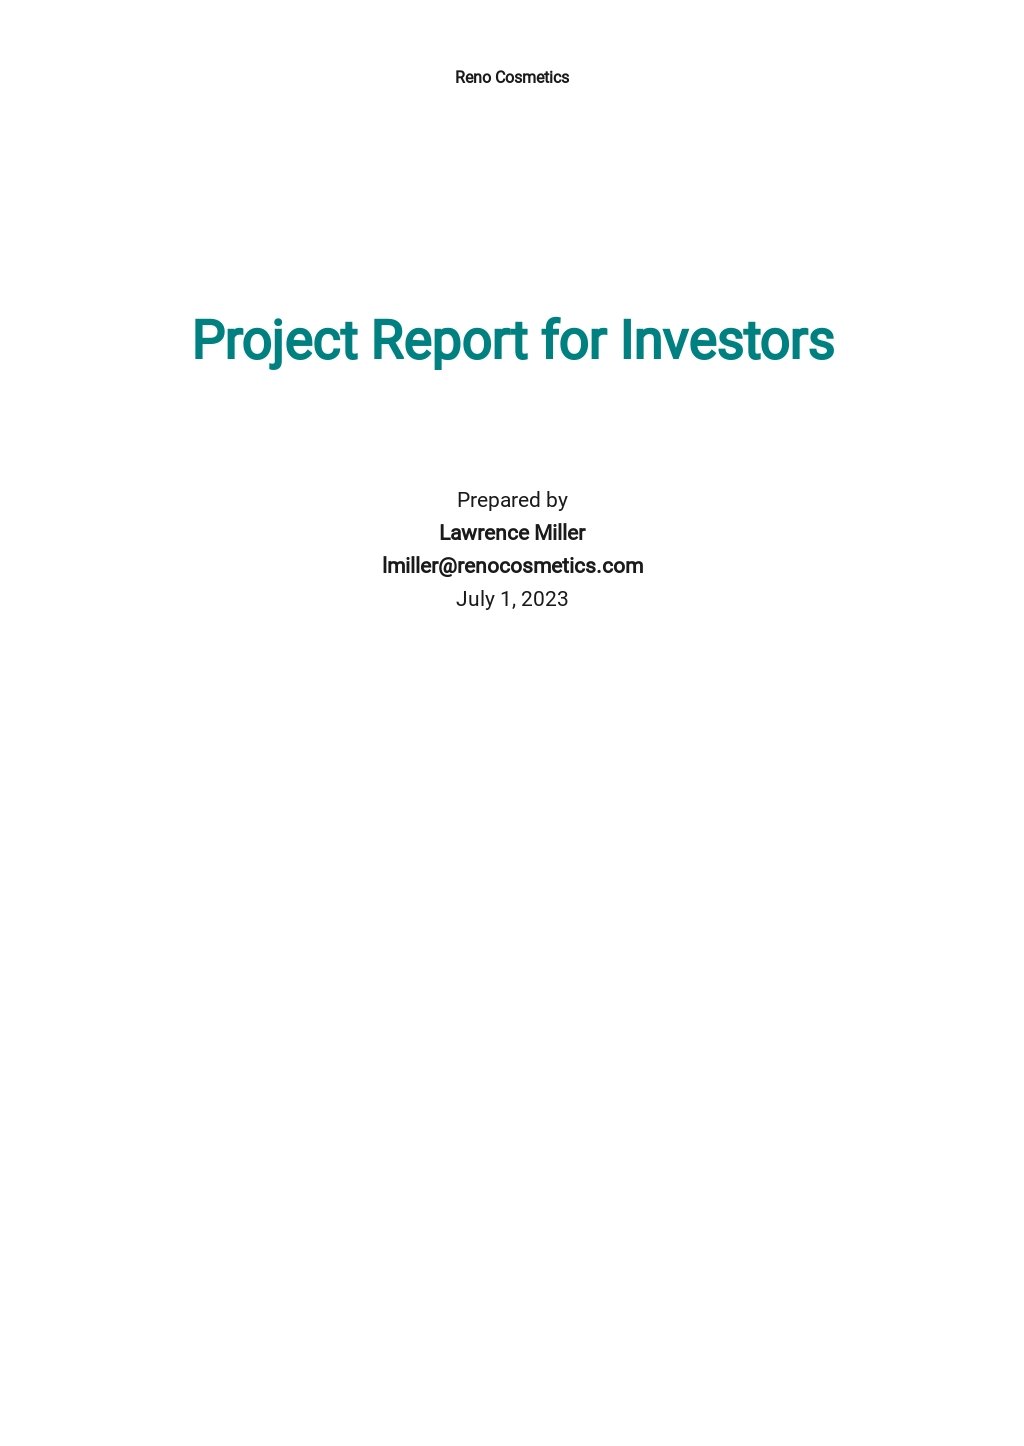 Sample Project Report For Investors Template.jpe